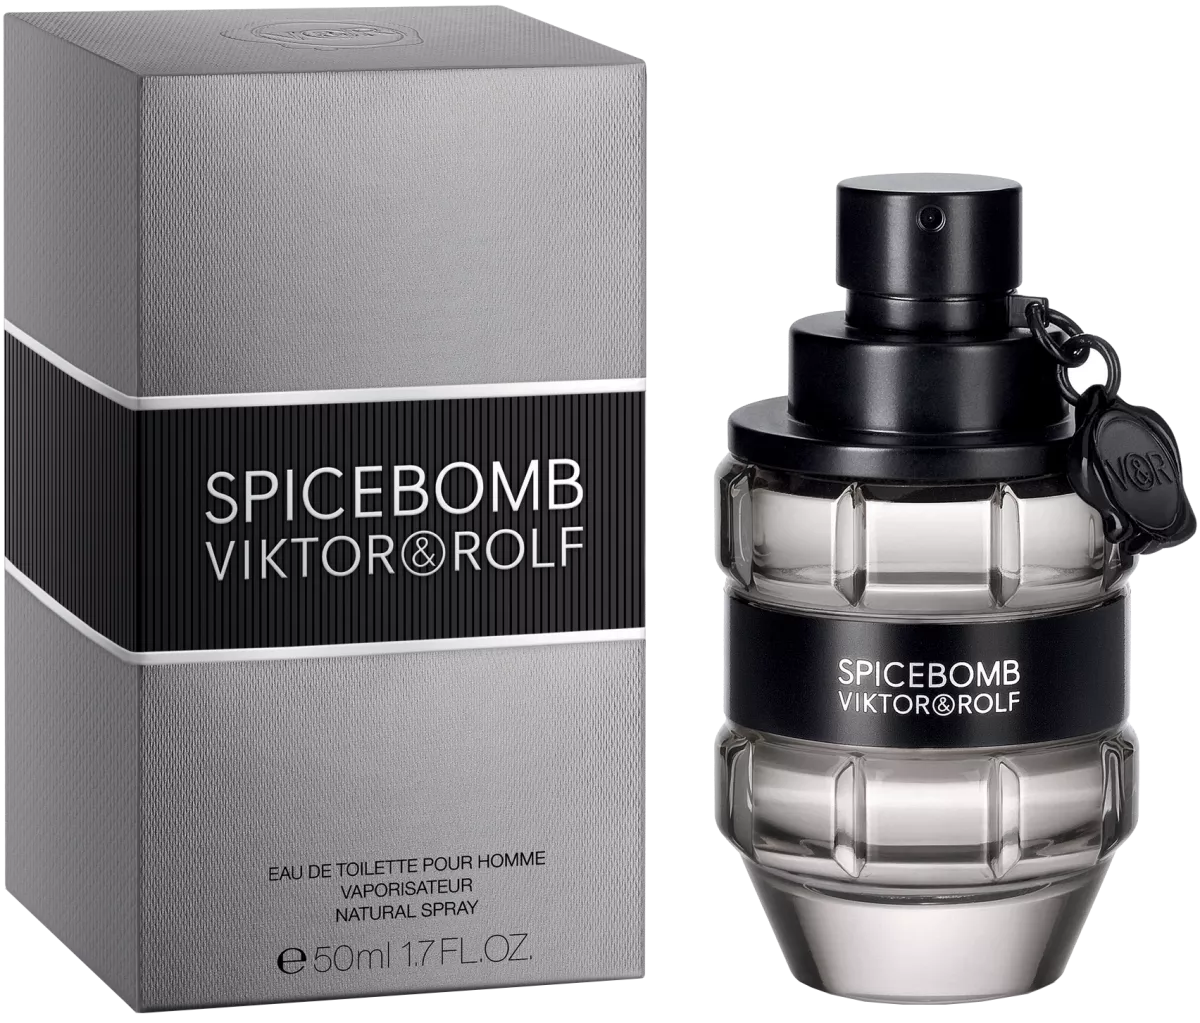 New Release! SPICEBOMB INFRARED! The Best Spicebomb? 